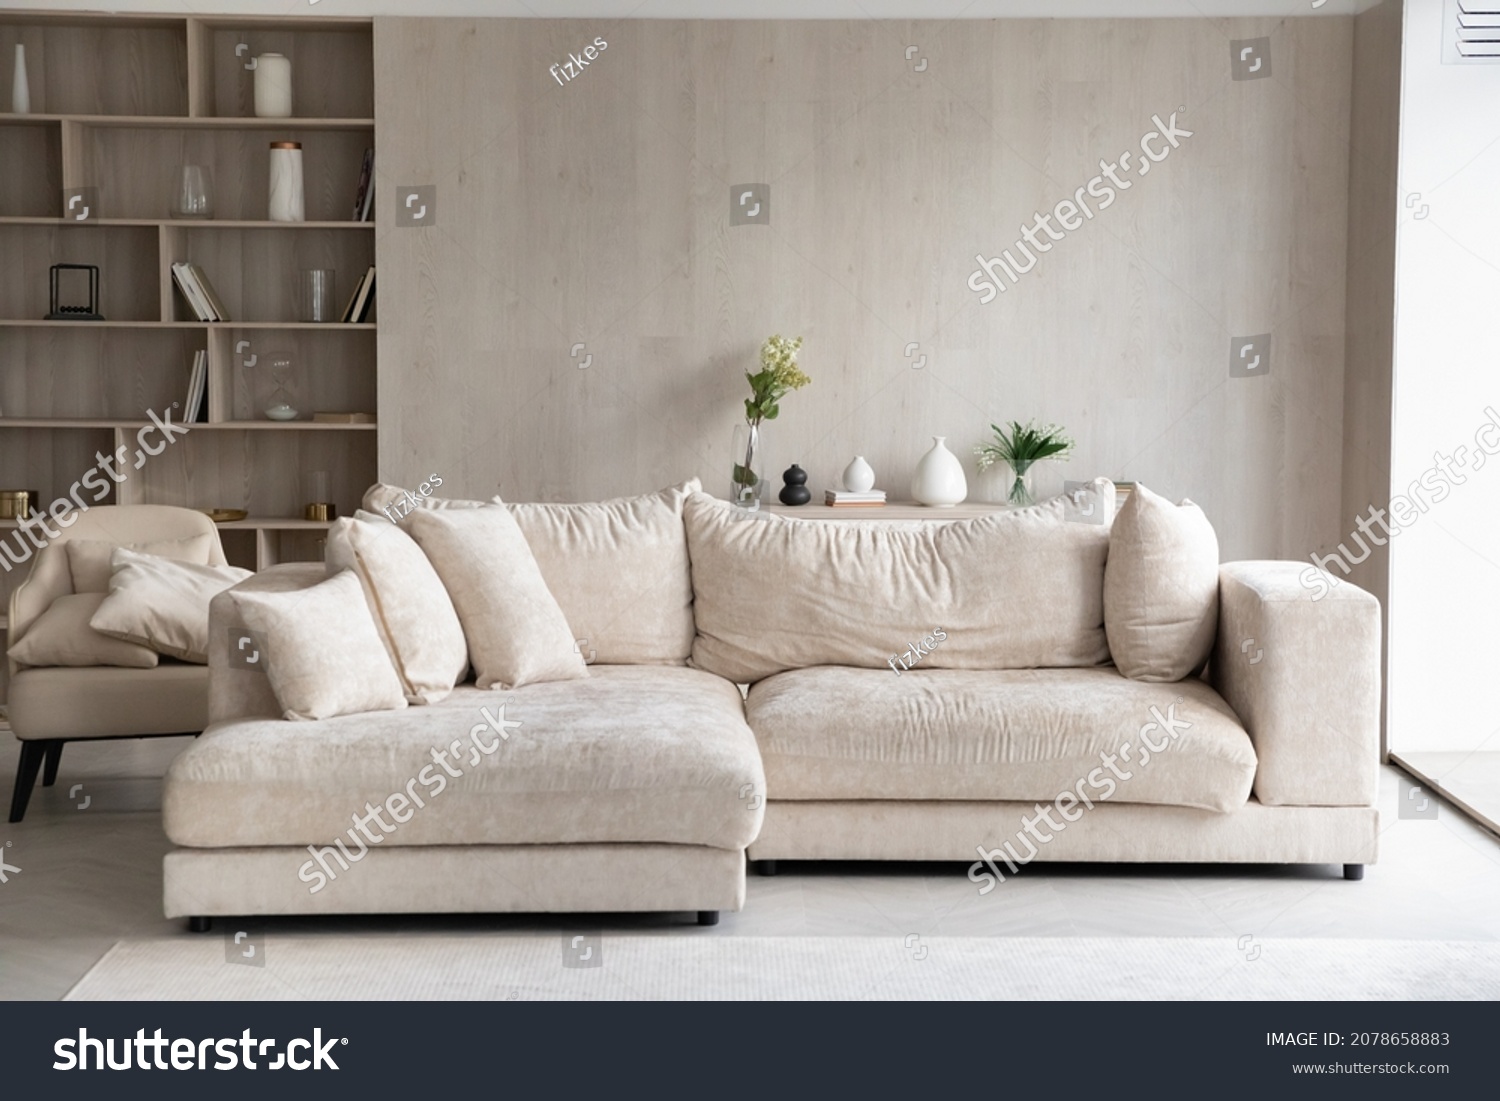 Fashion furniture inside modern light living room with white sofa, built-In bookcase with shelves, armchair, no people. Design interior ideas, furnishing store, new real-estate, rent property concept #2078658883